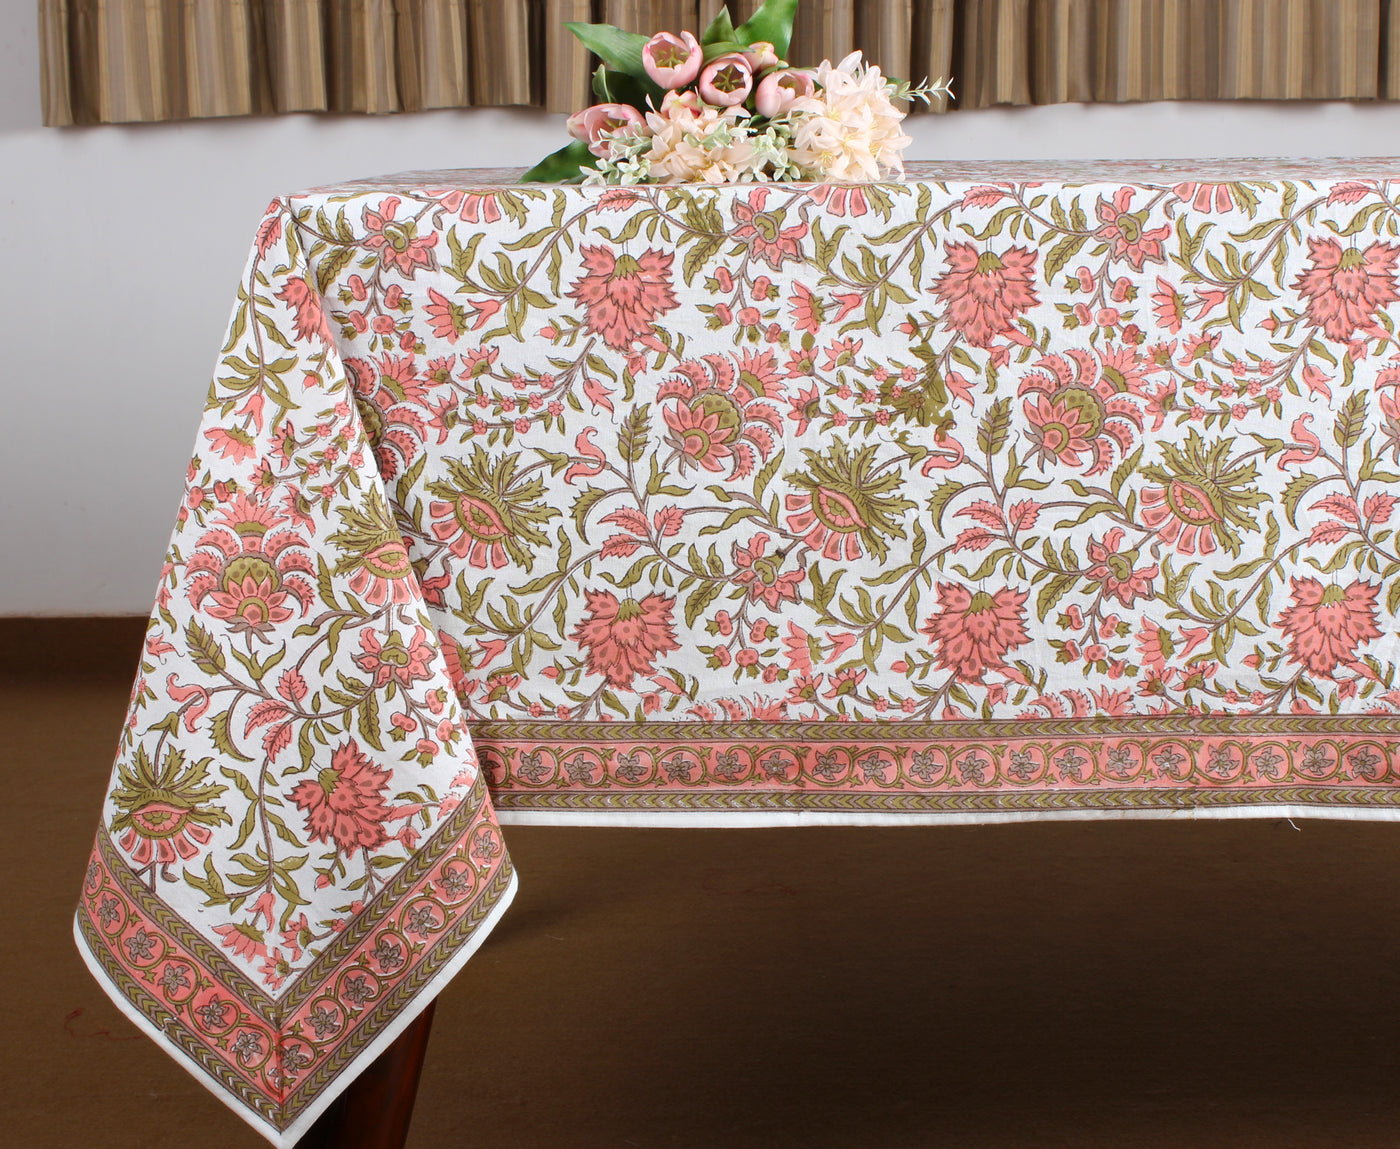 Fabricrush New York Pink and Olive Green Hand Block Print Cotton Cloth Dinning Table Cover Wedding Farmhouse Thanksgiving Christmas Spring Fall Tablecloth